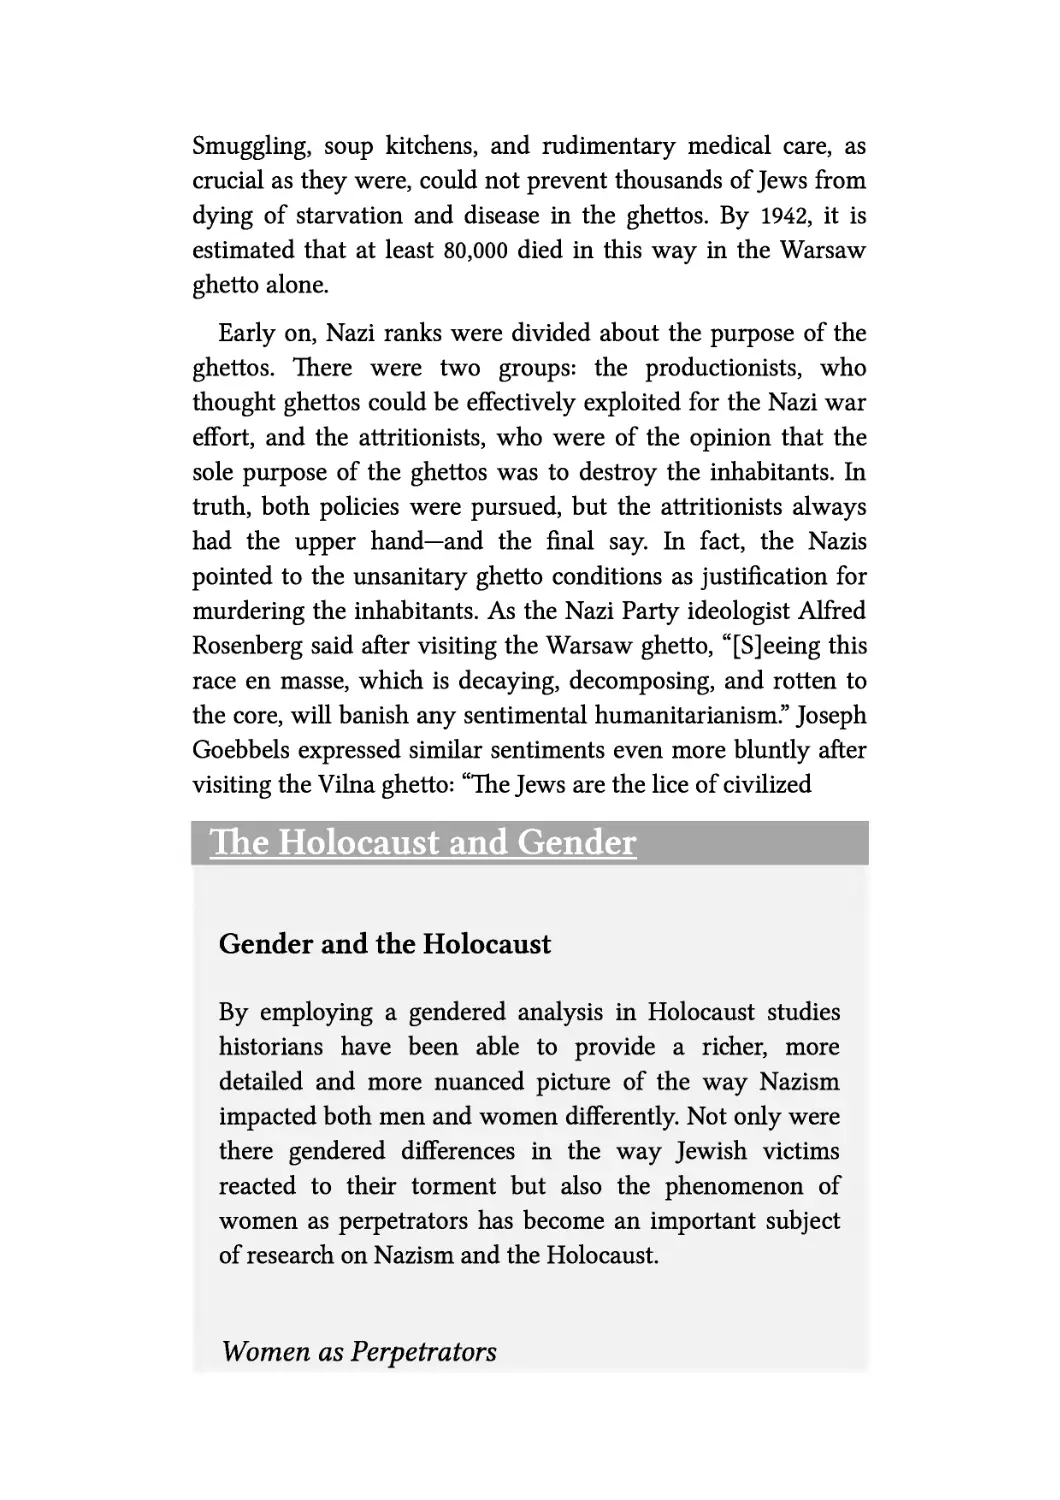 The Holocaust and Gender